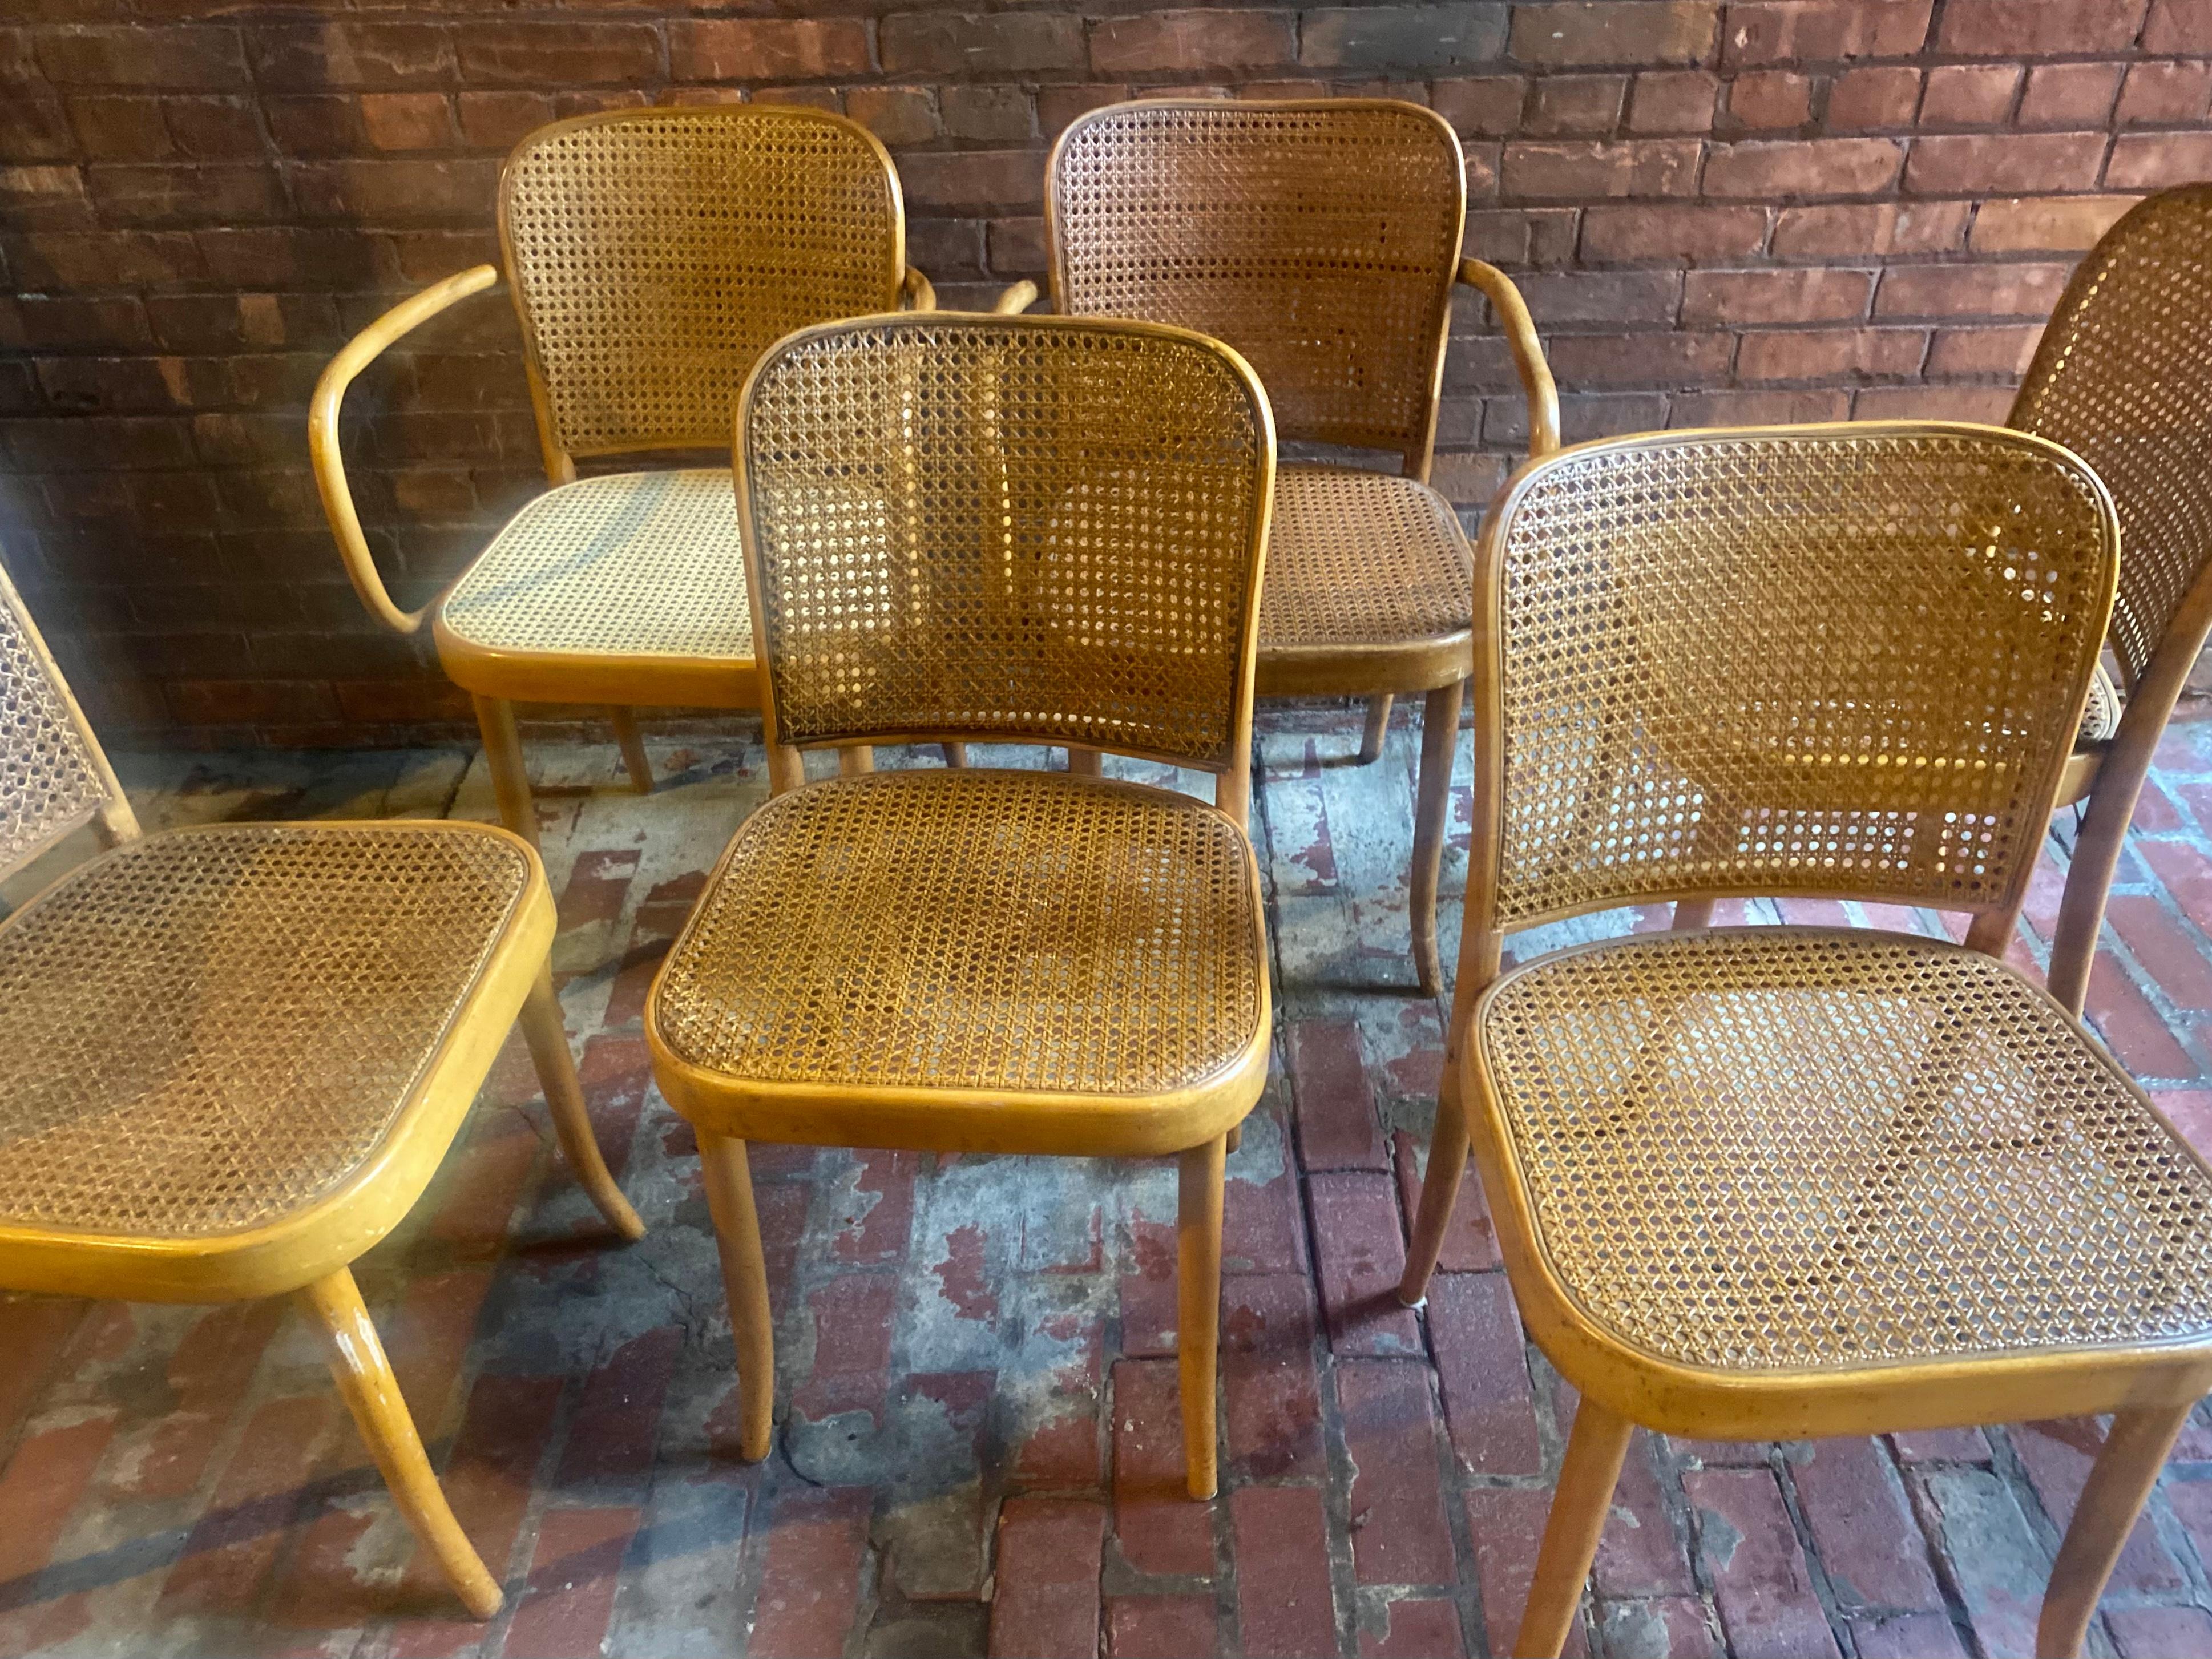 Set 8 Josef Hoffmann for Stendig Dining Chairs, Bentwood Prague Model 811,,, Nice set consisting of 4 armchairs and 4 side chairs,, 3 of the armchairs have newer caned seats,,(can be stained to match) bentwood frames in nice original